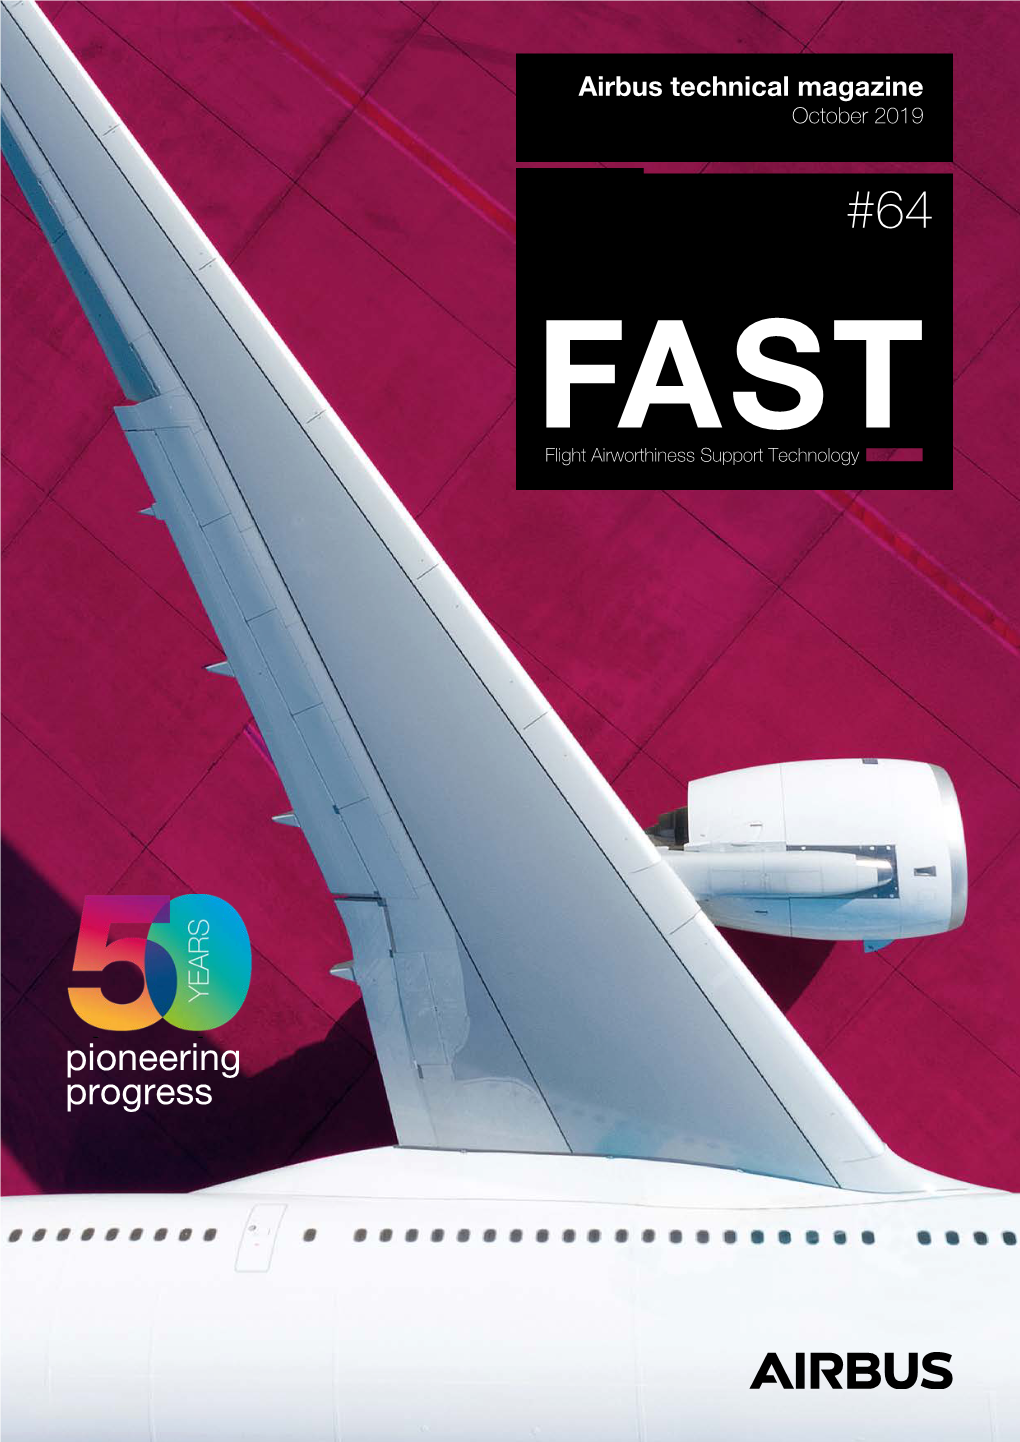 Pioneering Progress Already Have the FAST App? Now Get the Latest News for Customers Via Airbus’ Newsfeed App